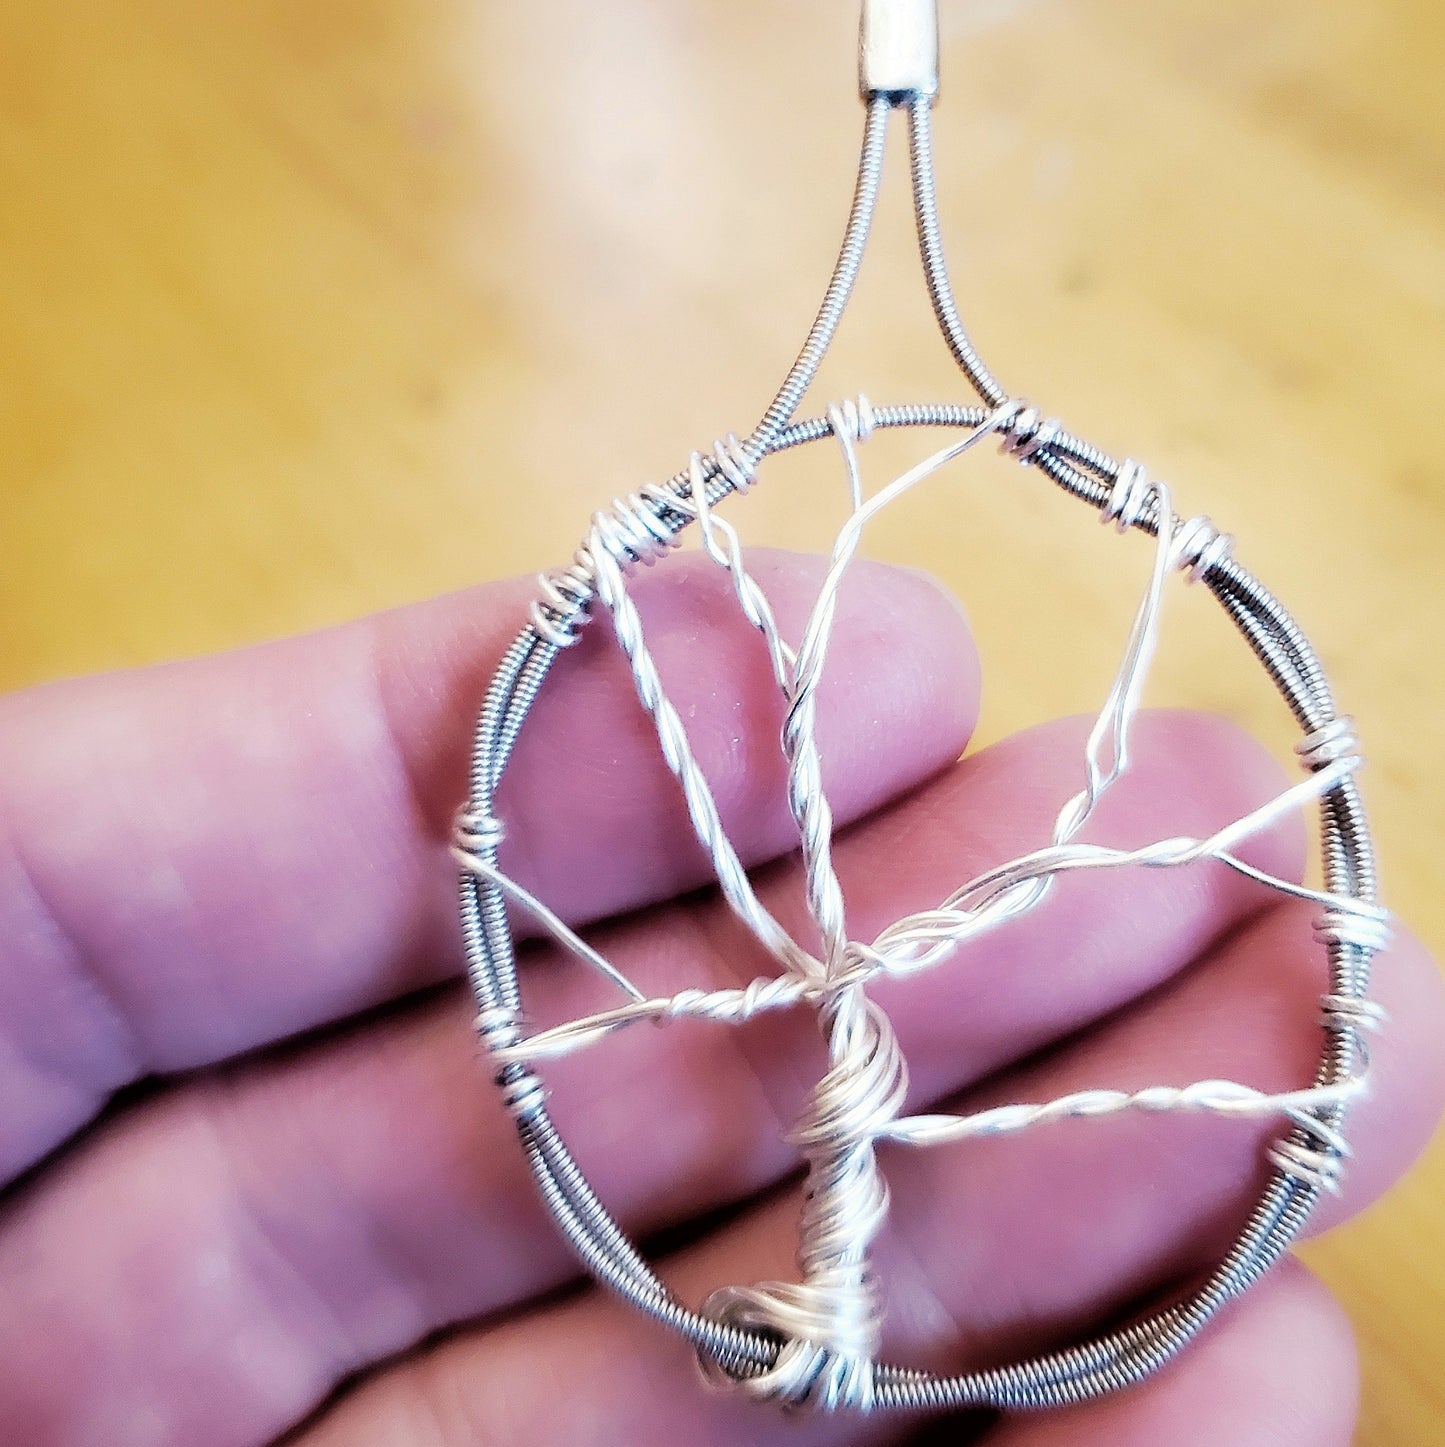 Upcycled Guitar String Tree of Life Necklace